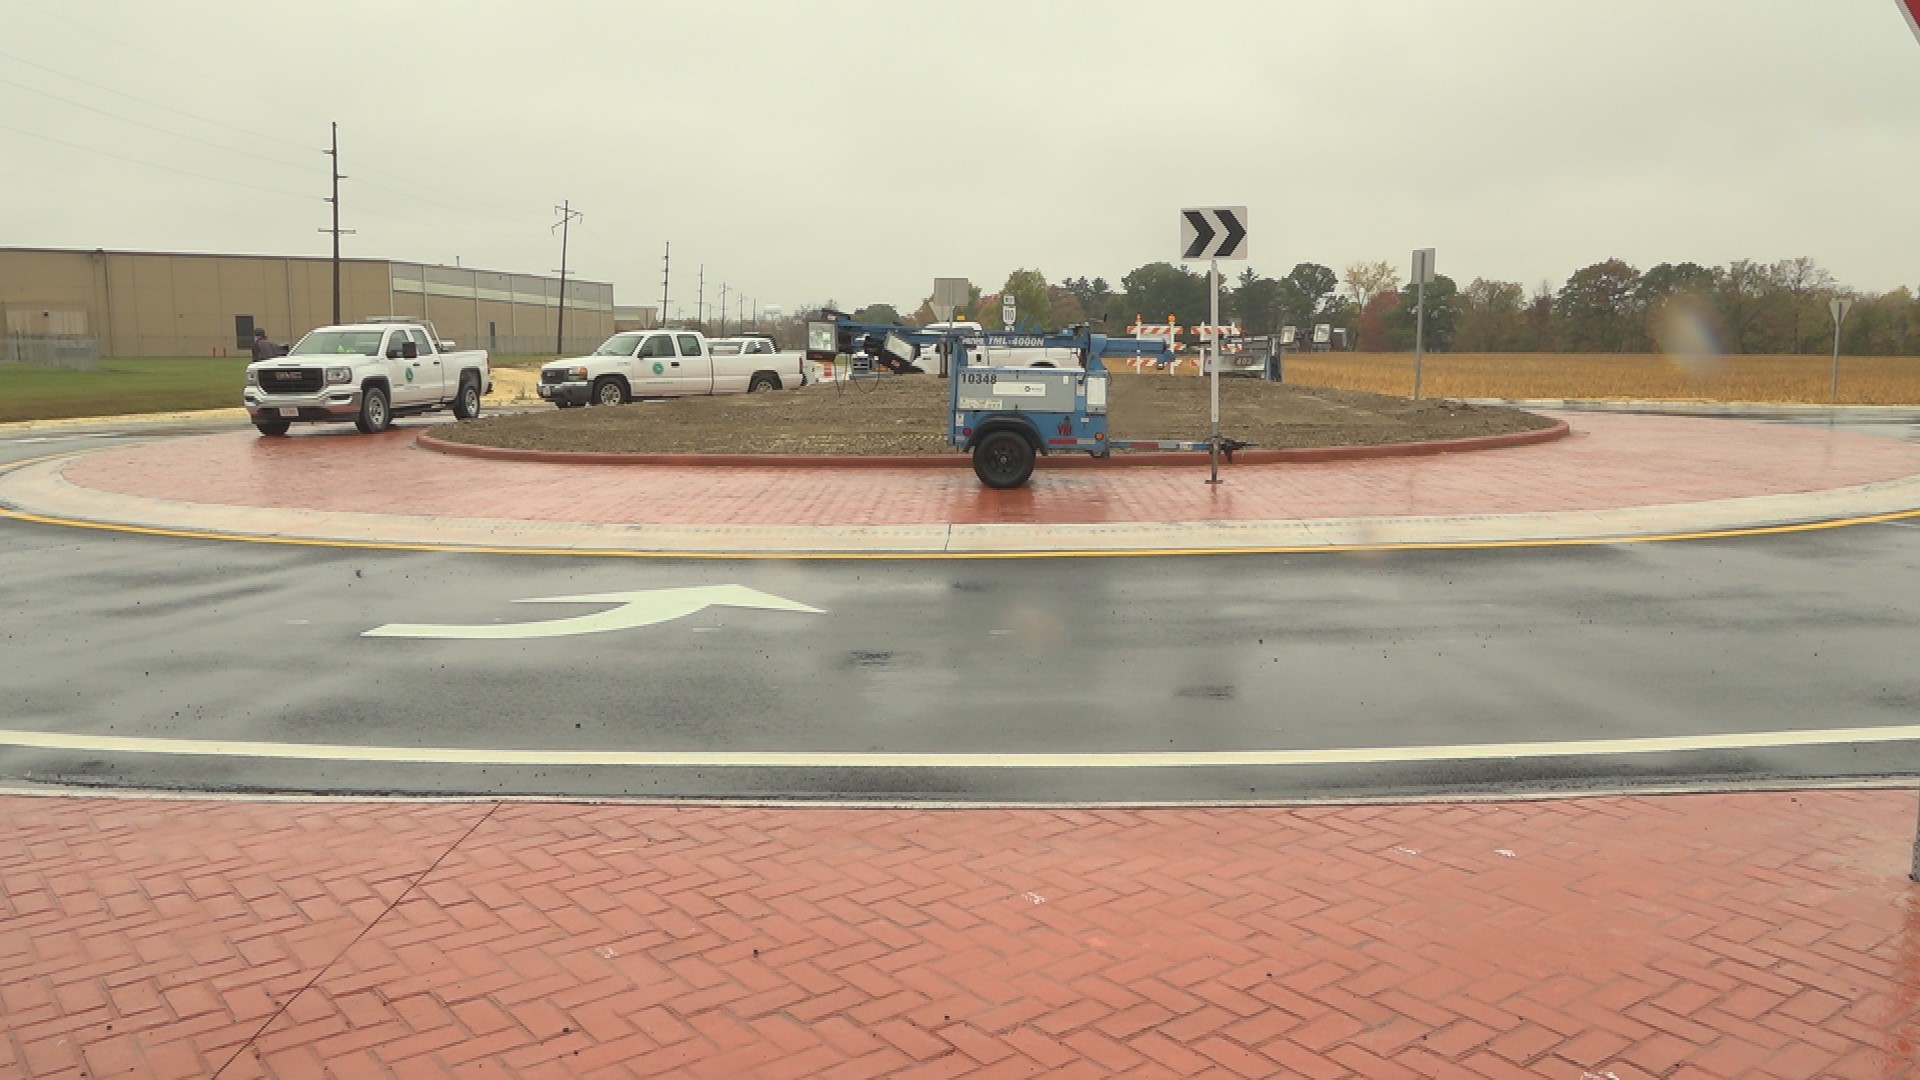 The roundabout is part of a multi-million dollar project to extend Industrial Drive across the Maumee River and connect with OH-110.